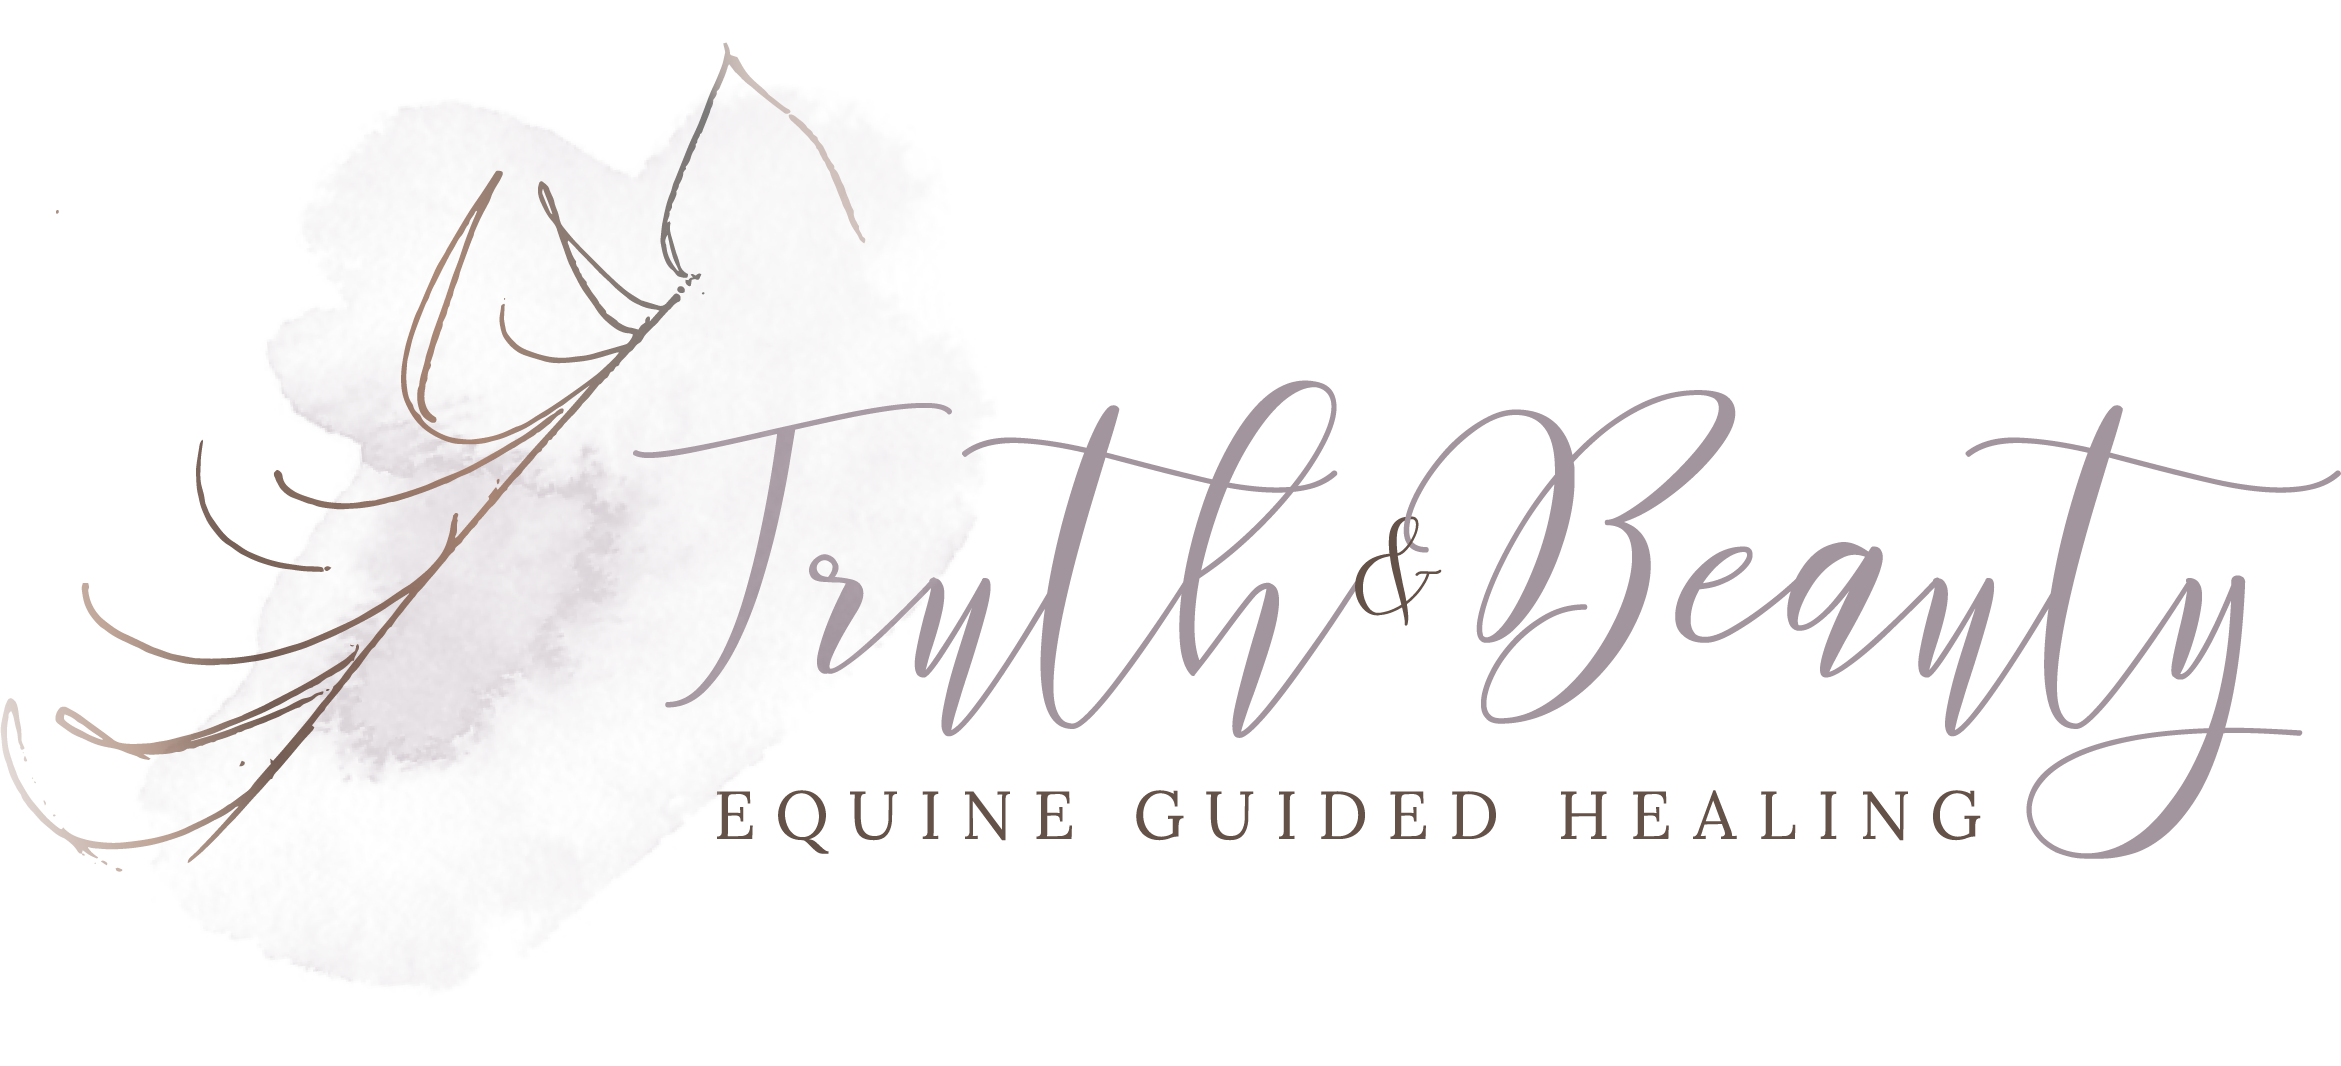 Truth &amp; Beauty Equine Guided Healing